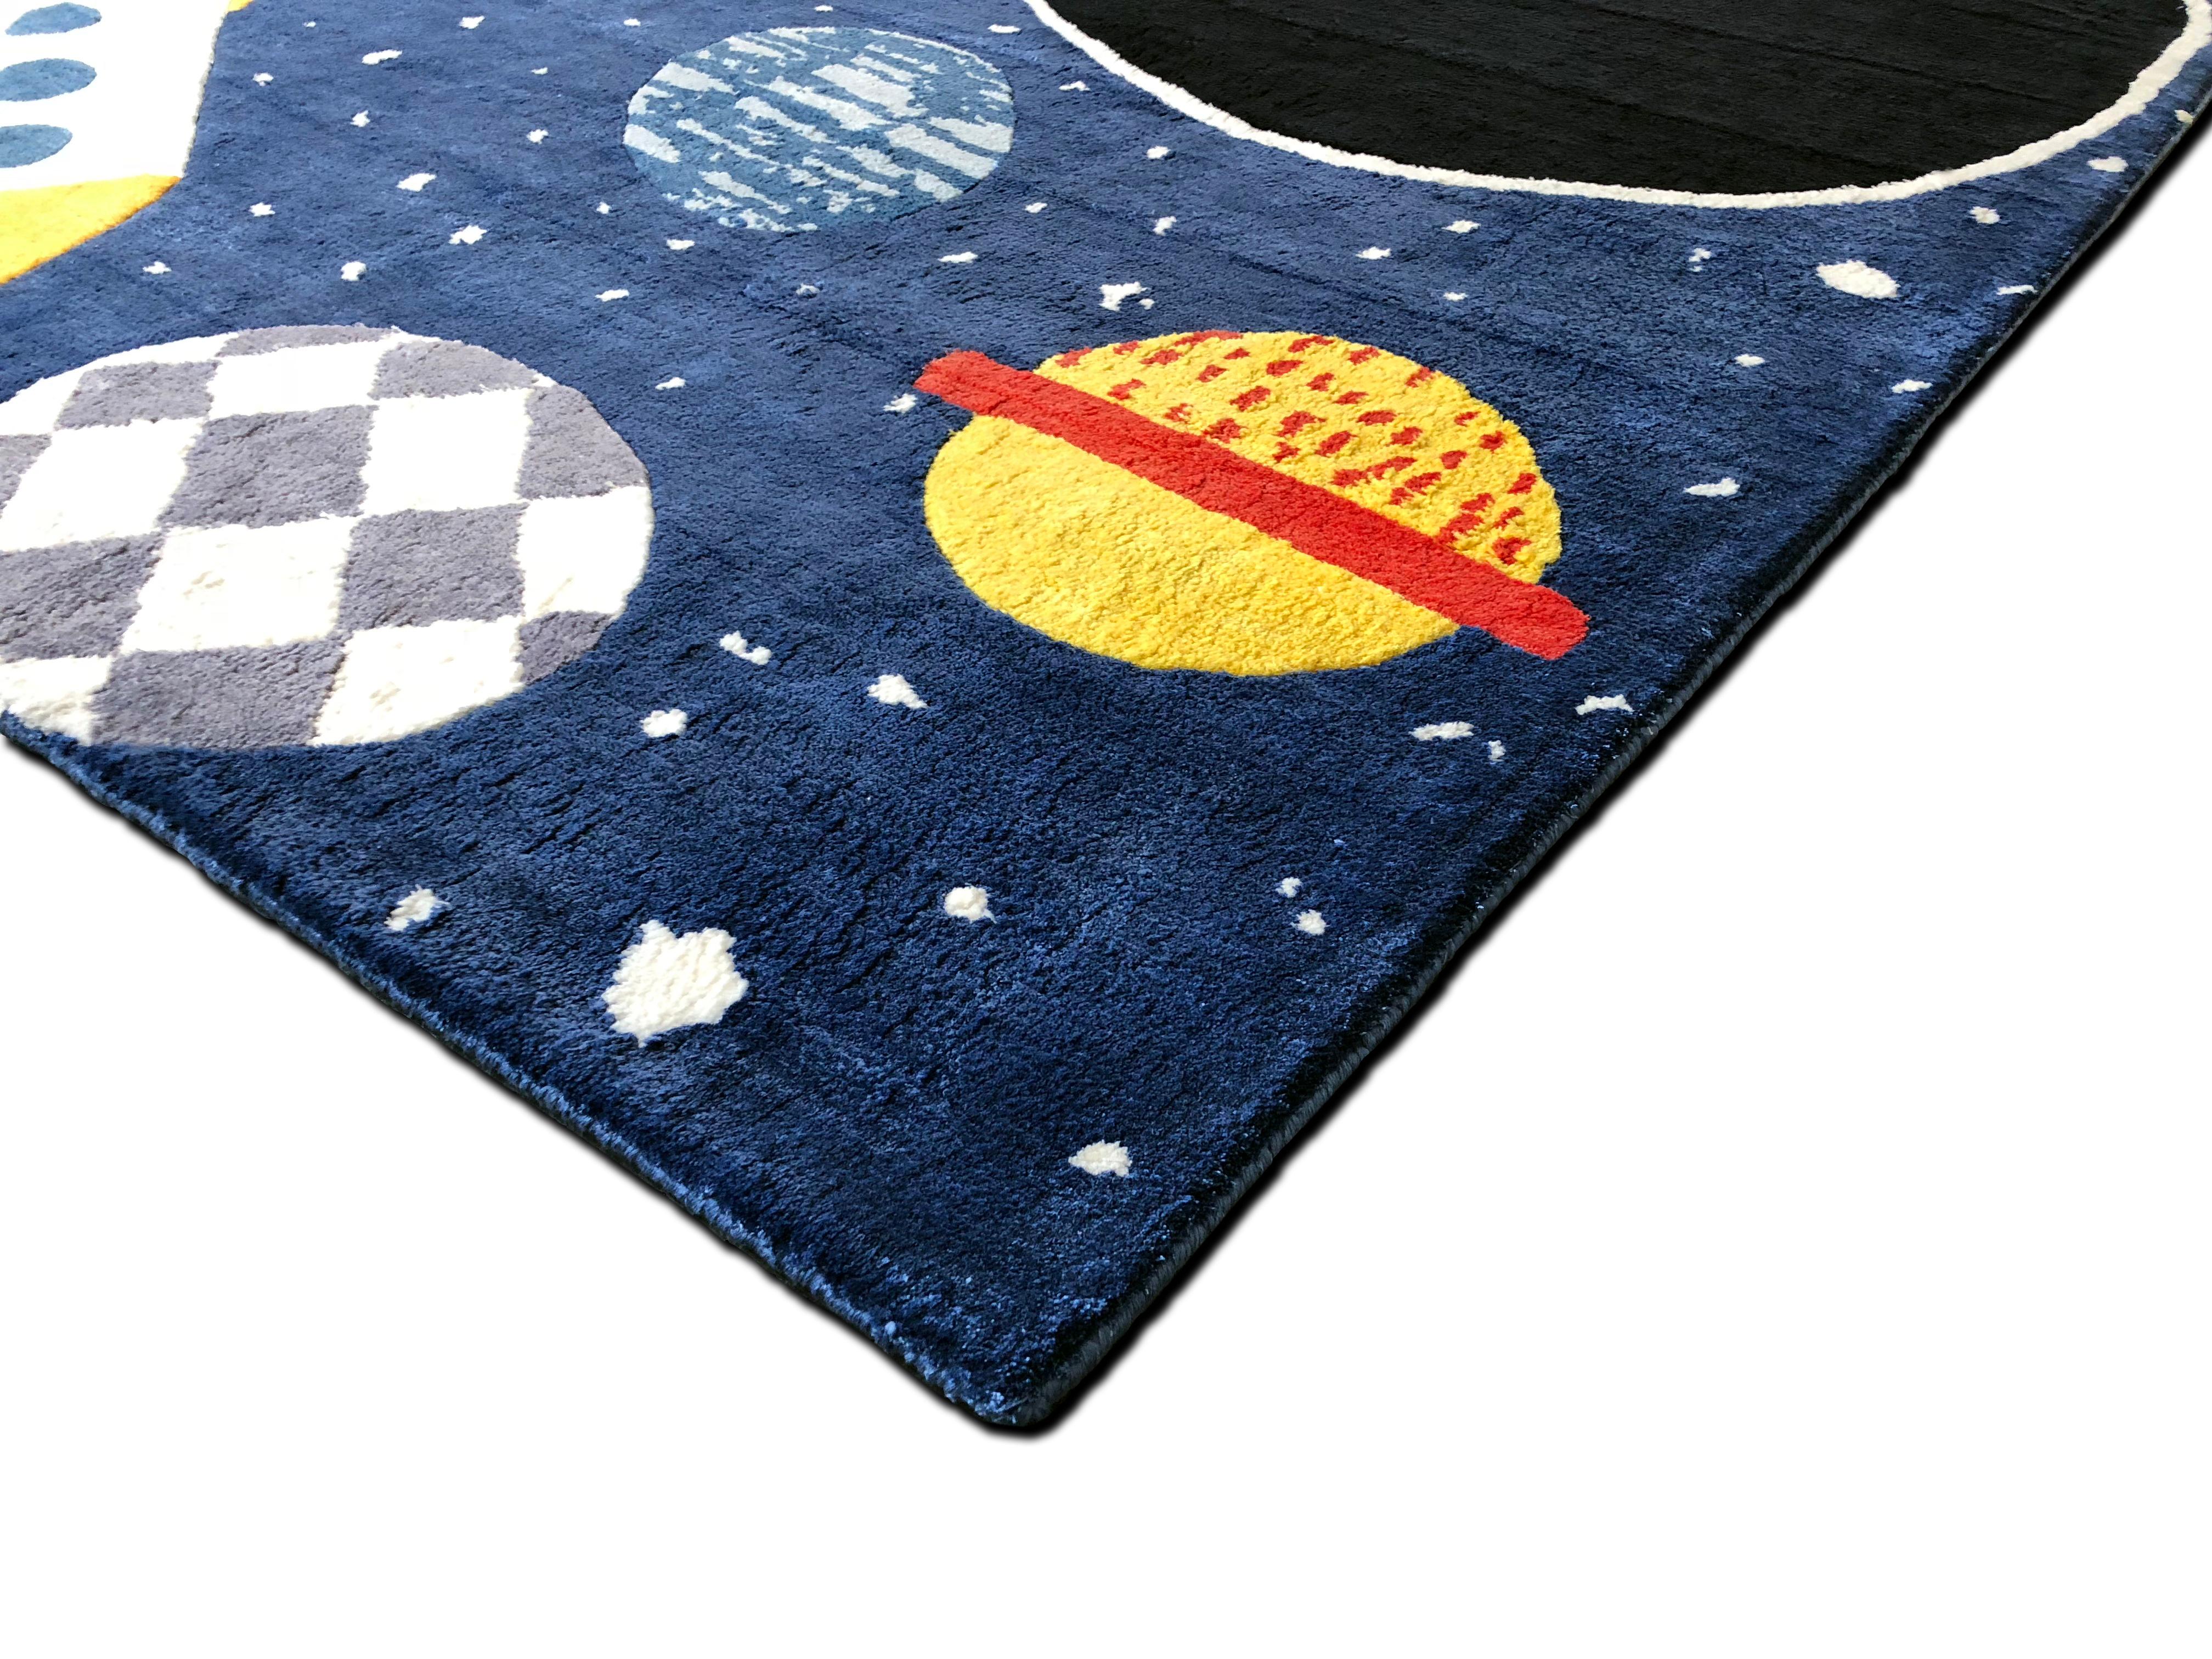 Space Ace Rug by Daria Solak, Hand Knotted, 100% New Zealand Wool 200x250cm In New Condition For Sale In London, GB